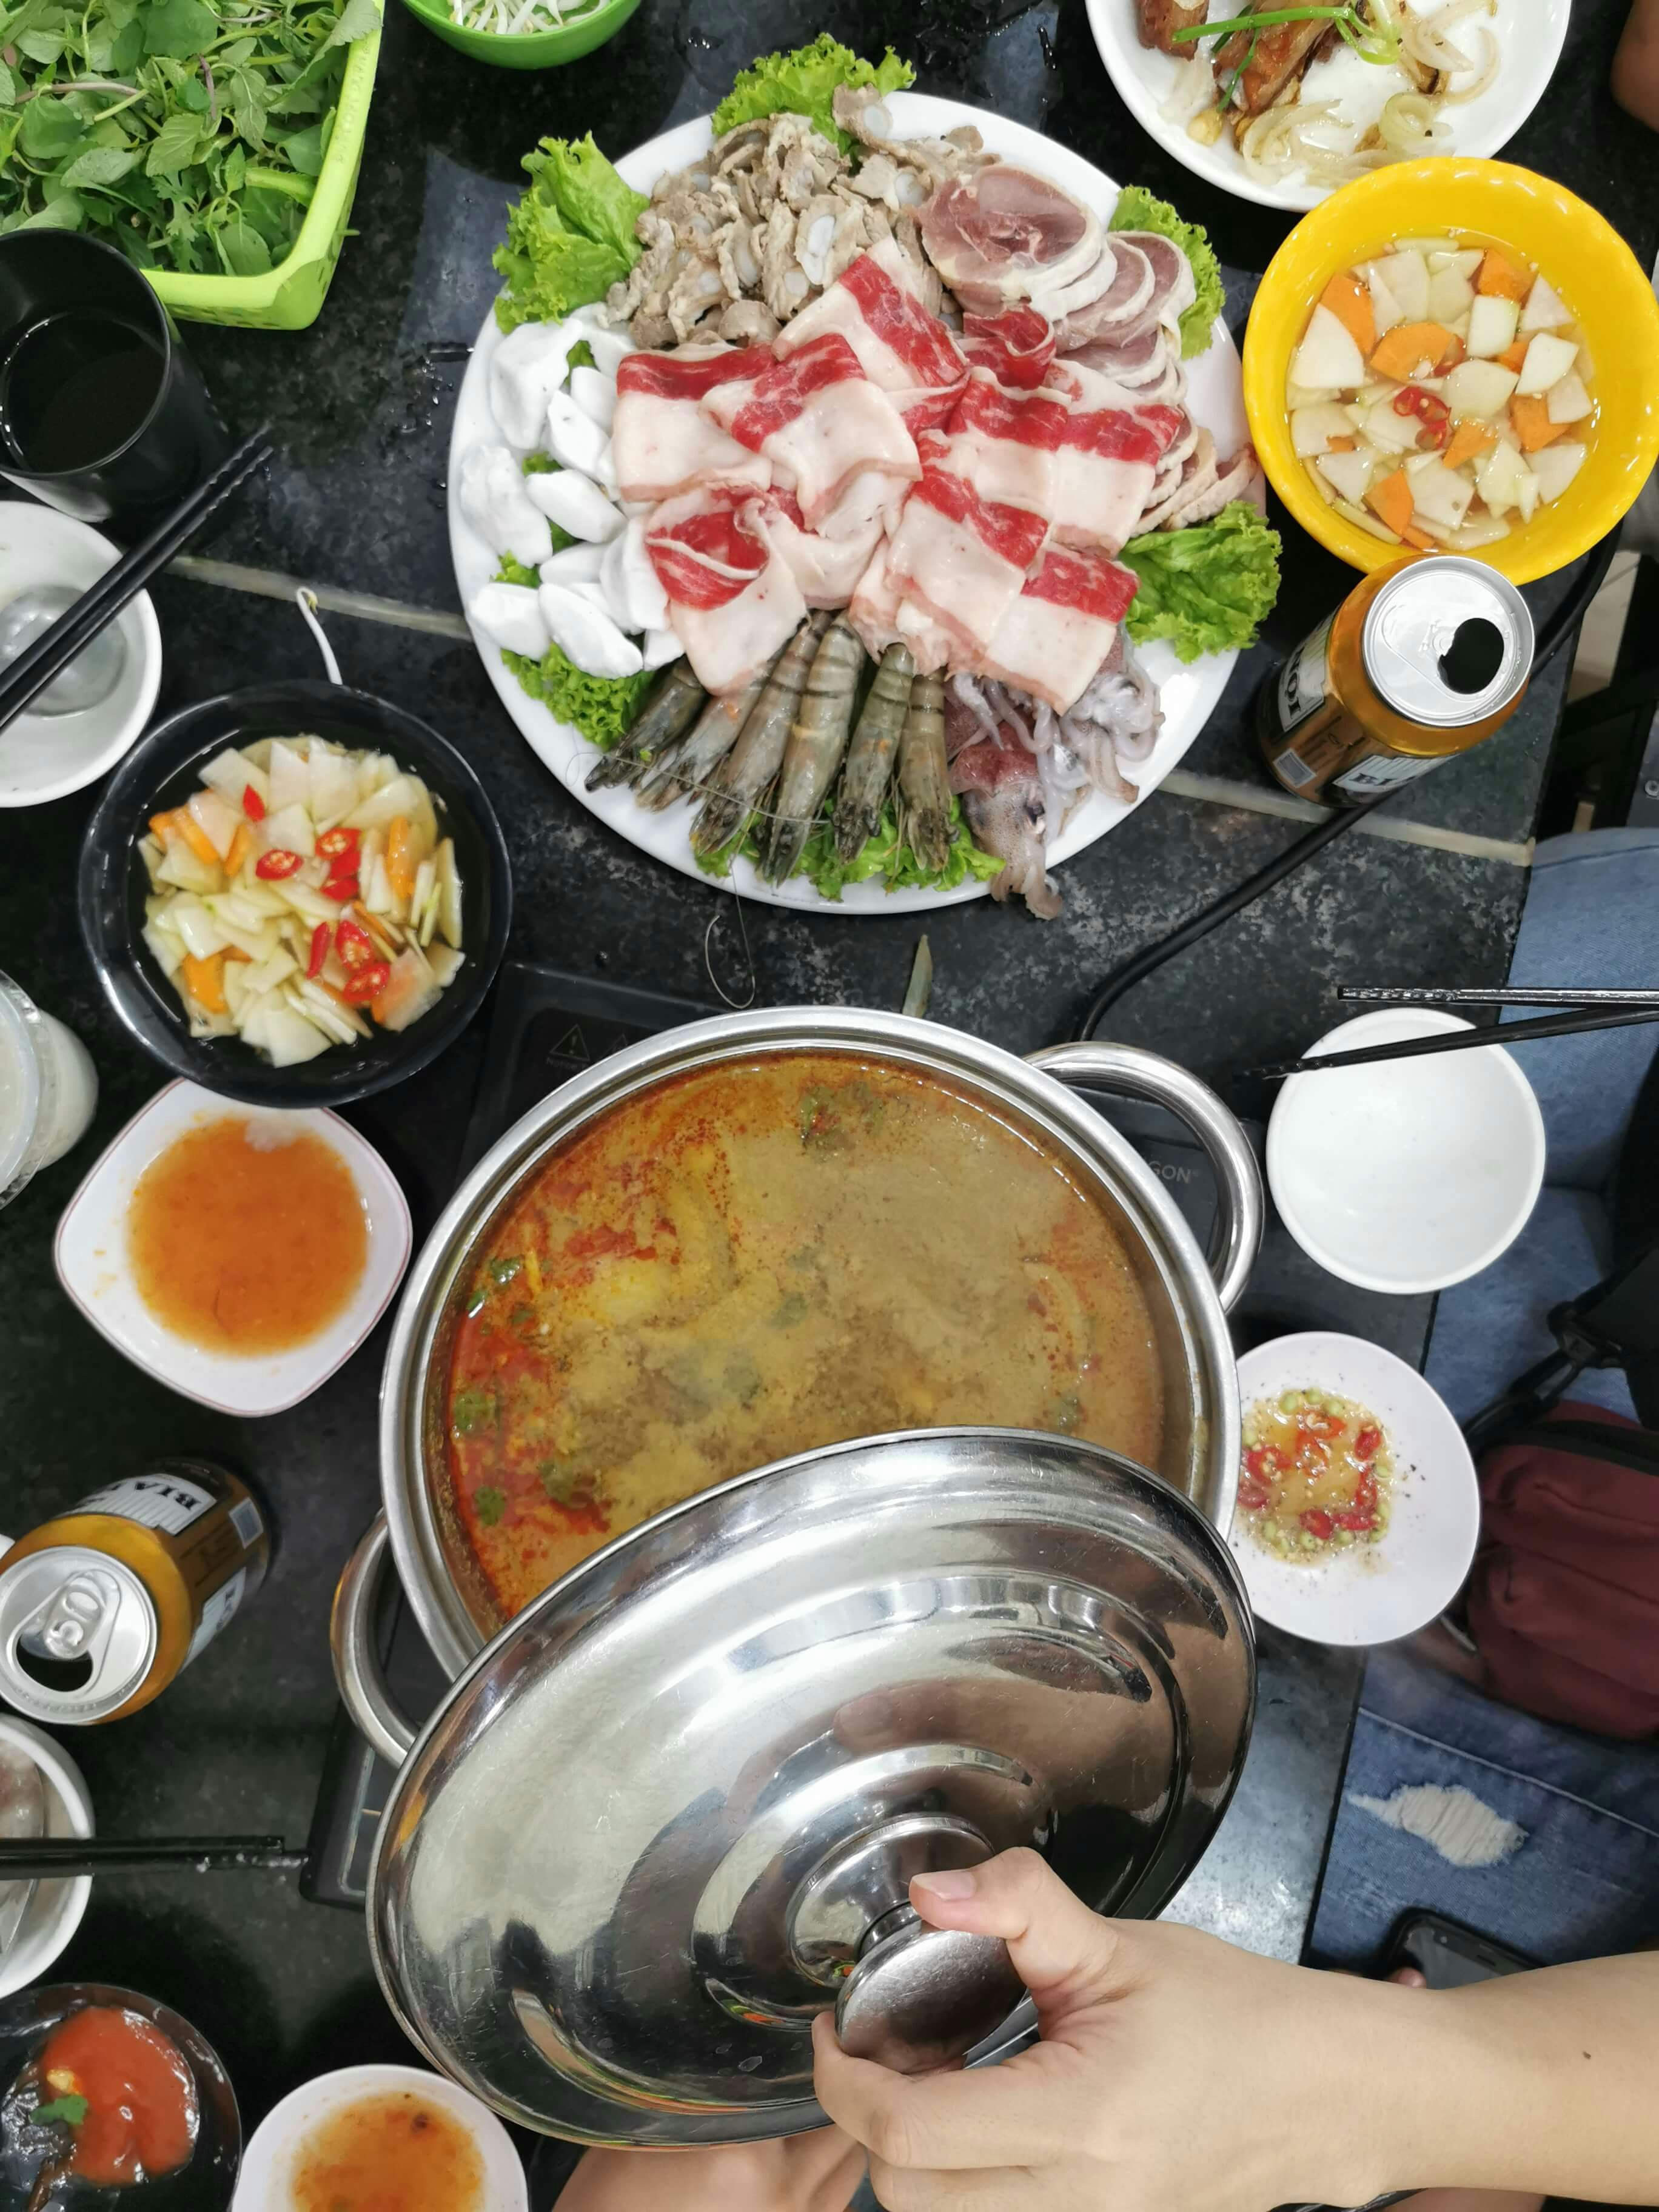 Someone is taking off a lid on a big pot of broth. Other dishes filled with vegetables and meat are on the table and two open cans of beer.